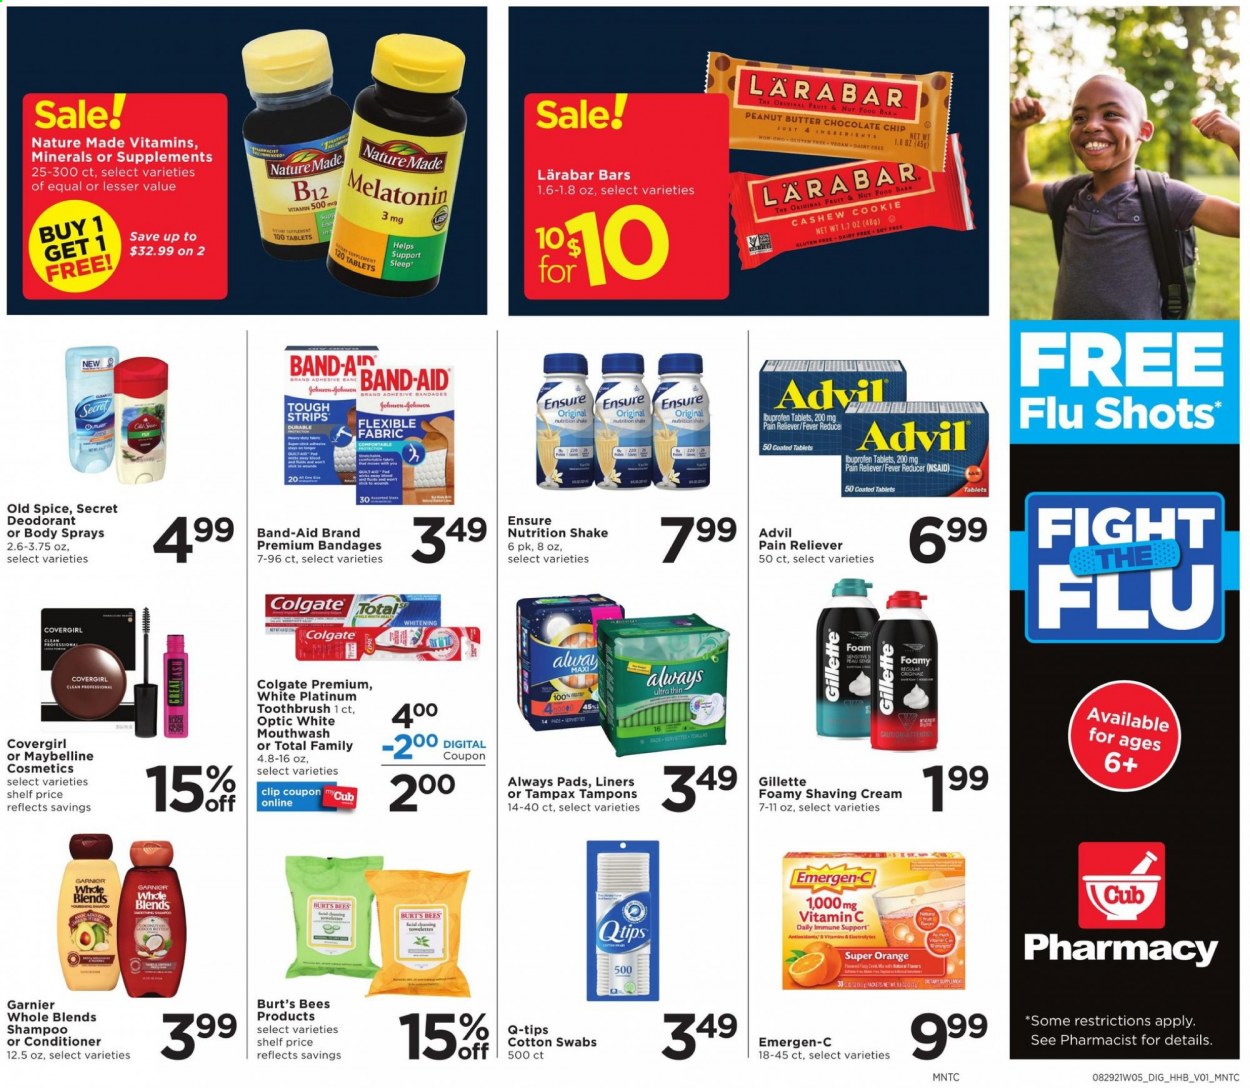 thumbnail - Cub Foods Flyer - 08/29/2021 - 09/04/2021 - Sales products - oranges, shake, strips, spice, peanut butter, Omo, shampoo, Old Spice, Colgate, toothbrush, mouthwash, Tampax, Always pads, tampons, Garnier, conditioner, anti-perspirant, deodorant, Gillette, Nature Made, vitamin c, Ibuprofen, Advil Rapid, Emergen-C. Page 13.